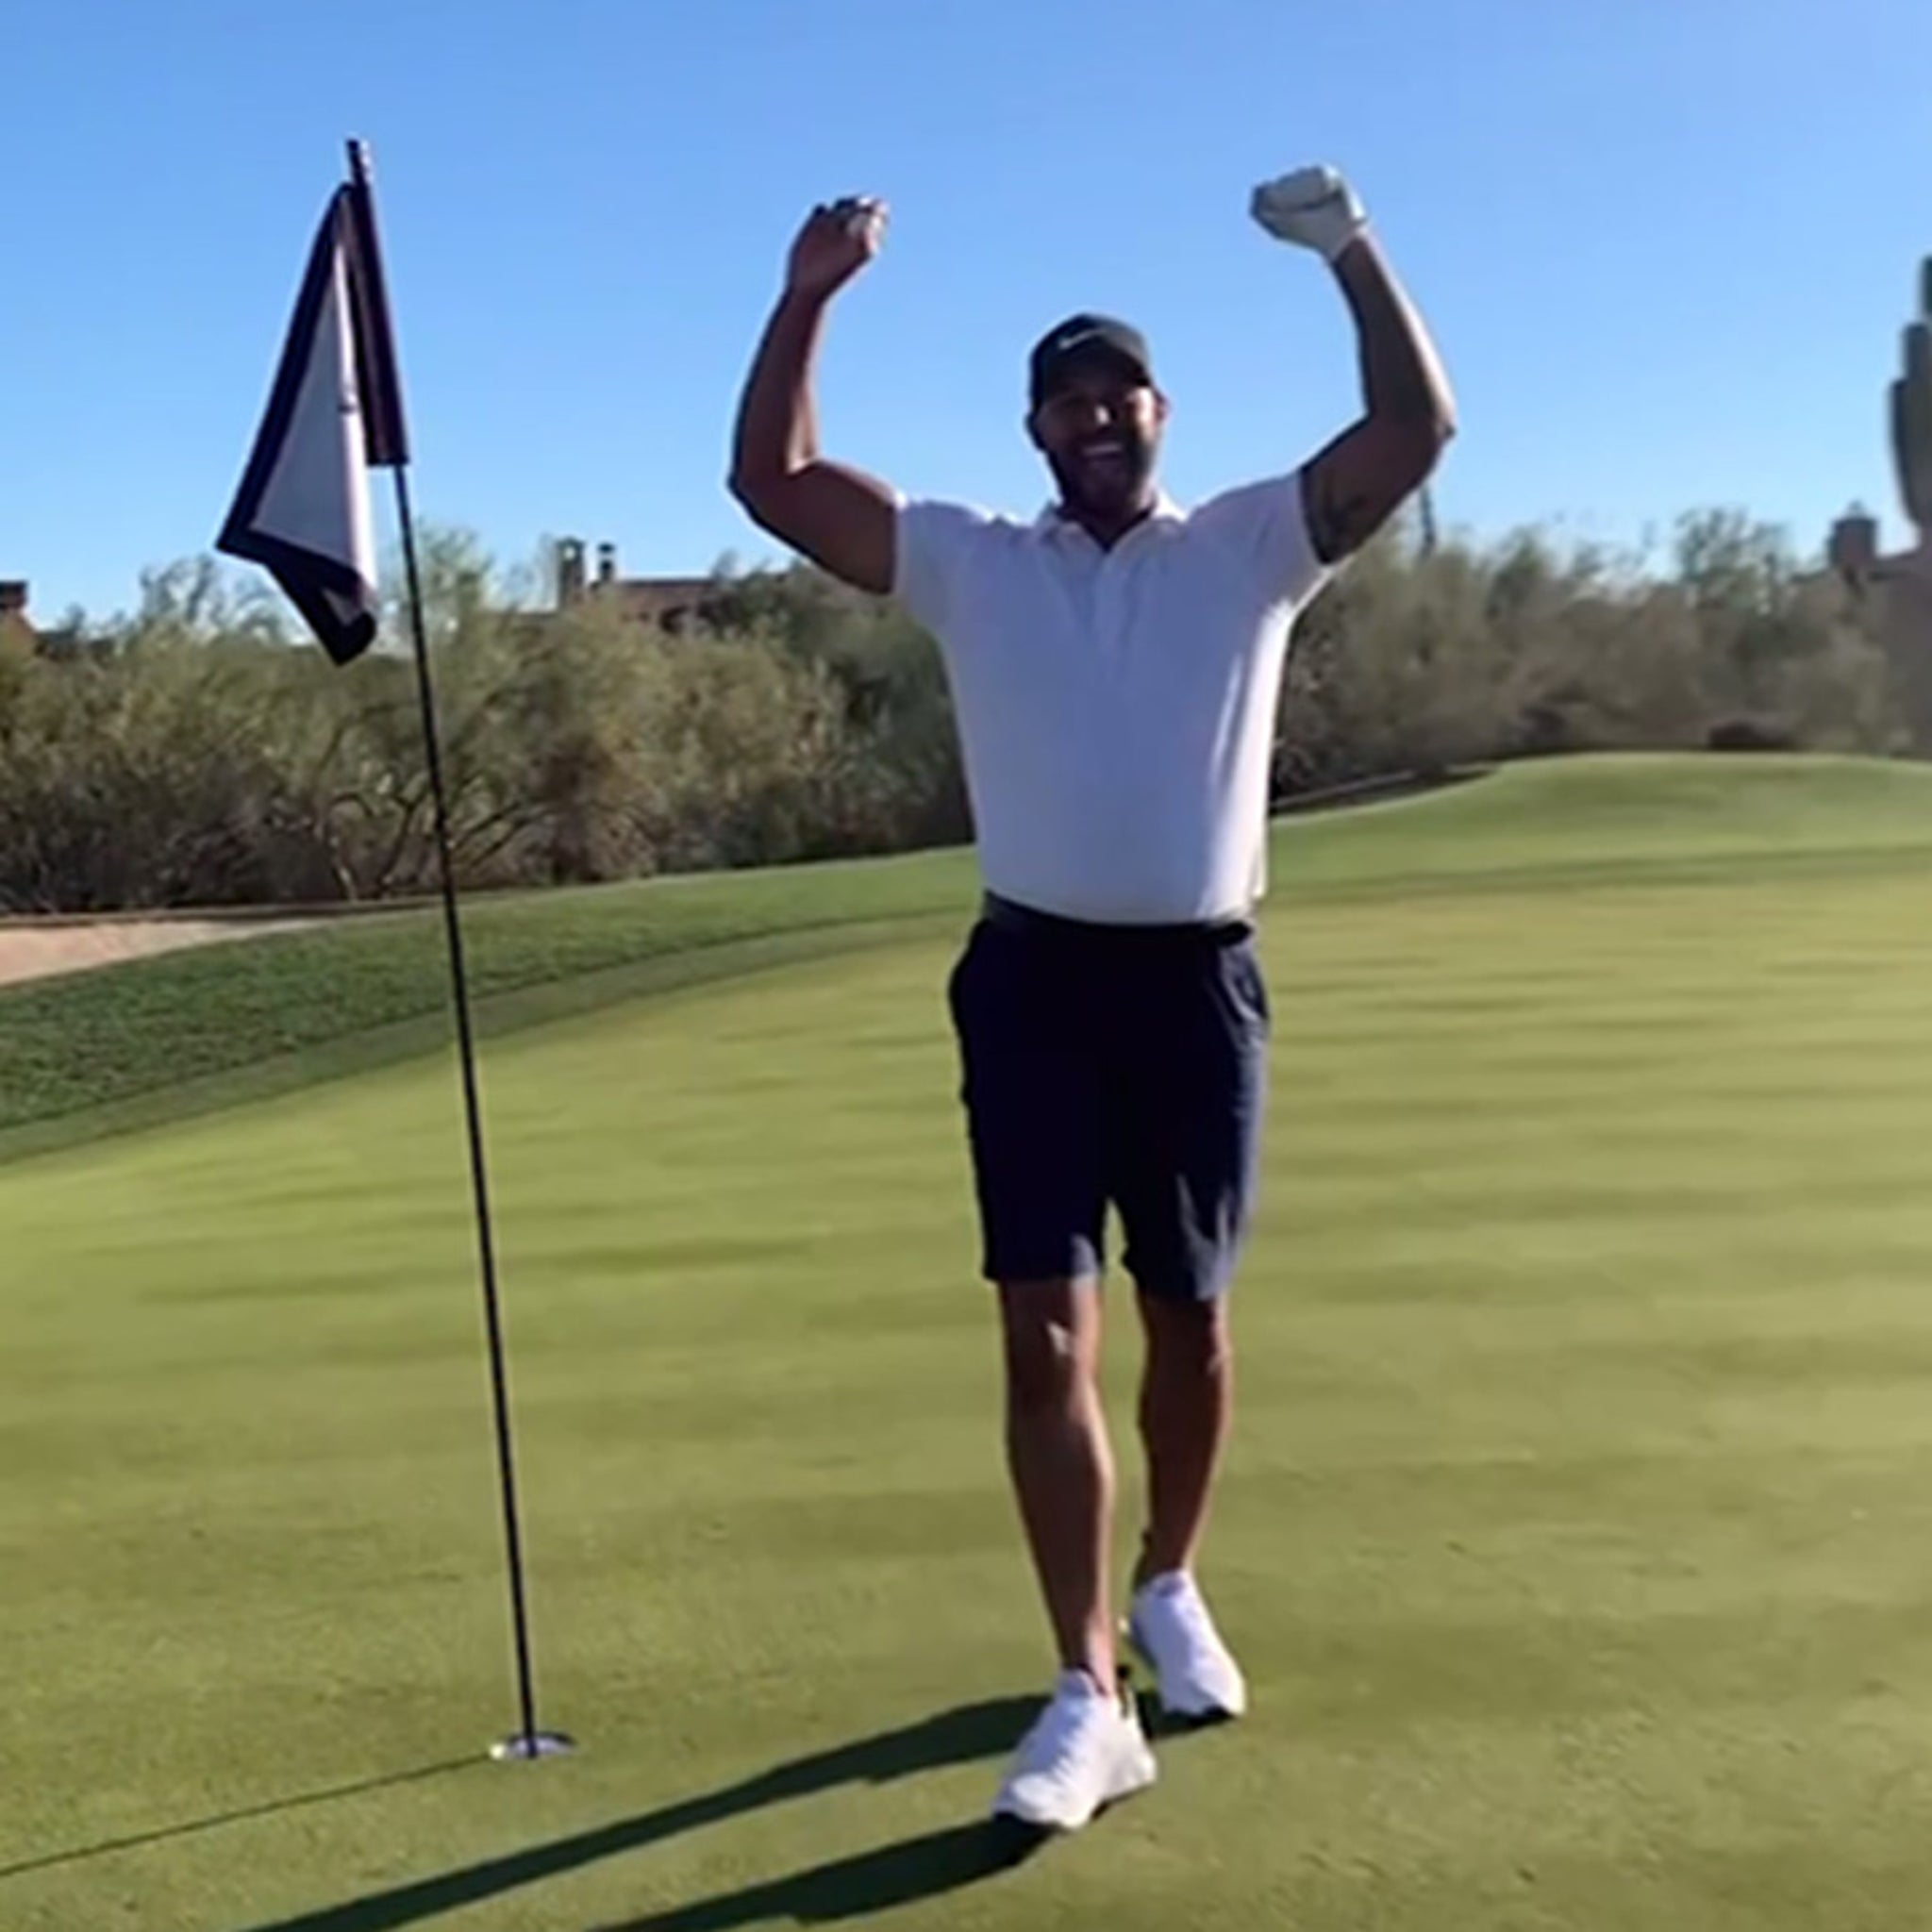 New York Yankees' Aaron Hicks makes hole-in-one on par 4